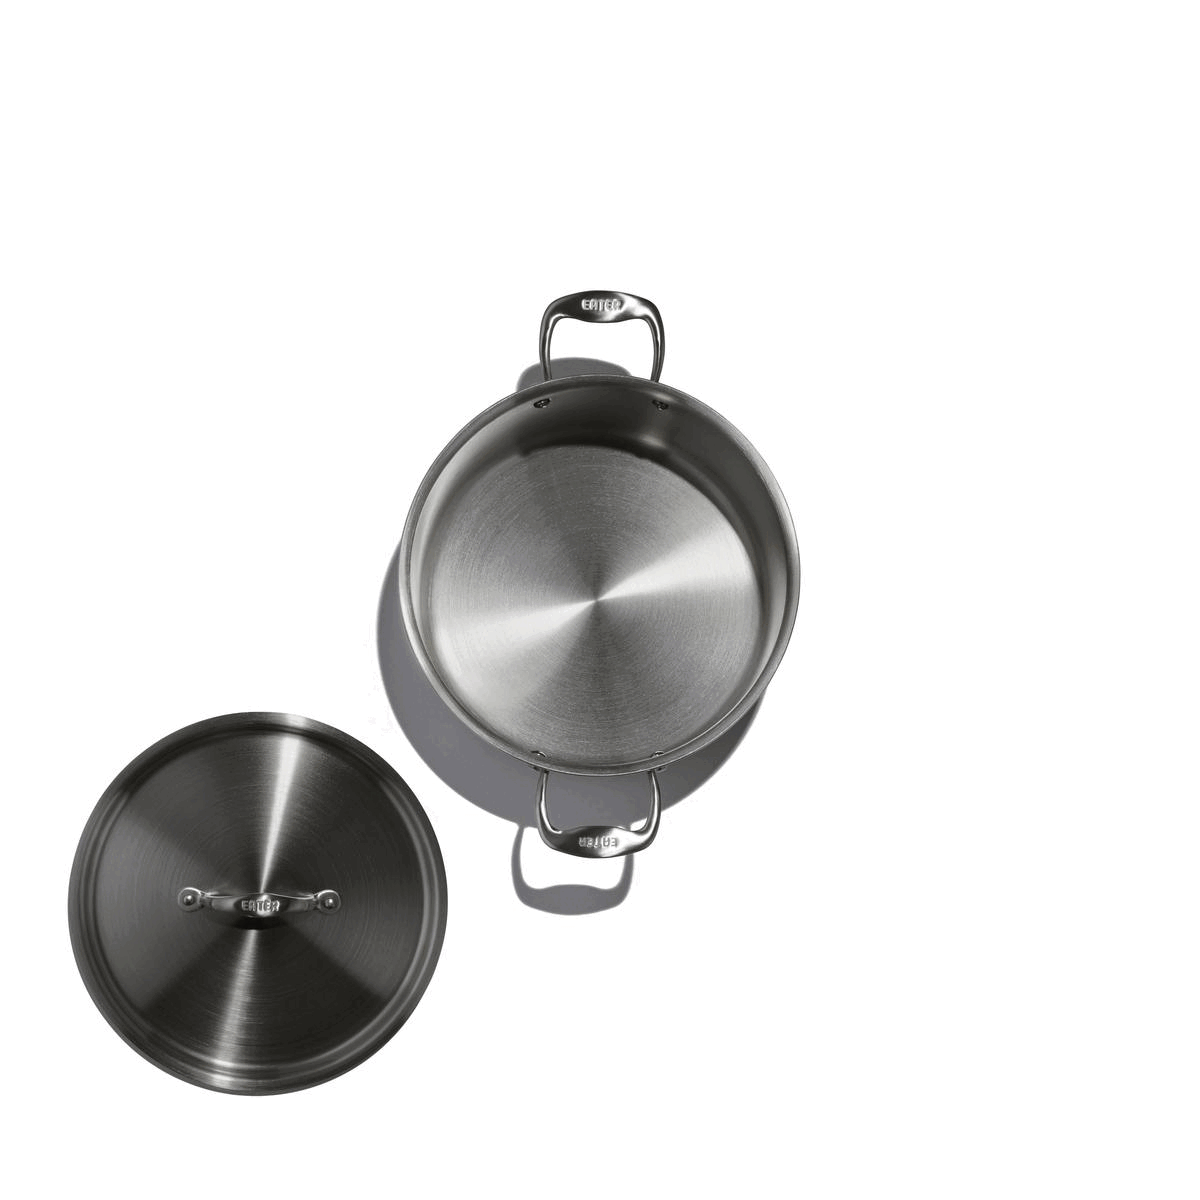 Eater x Heritage Steel 8 Quart Stock Pot with Lid